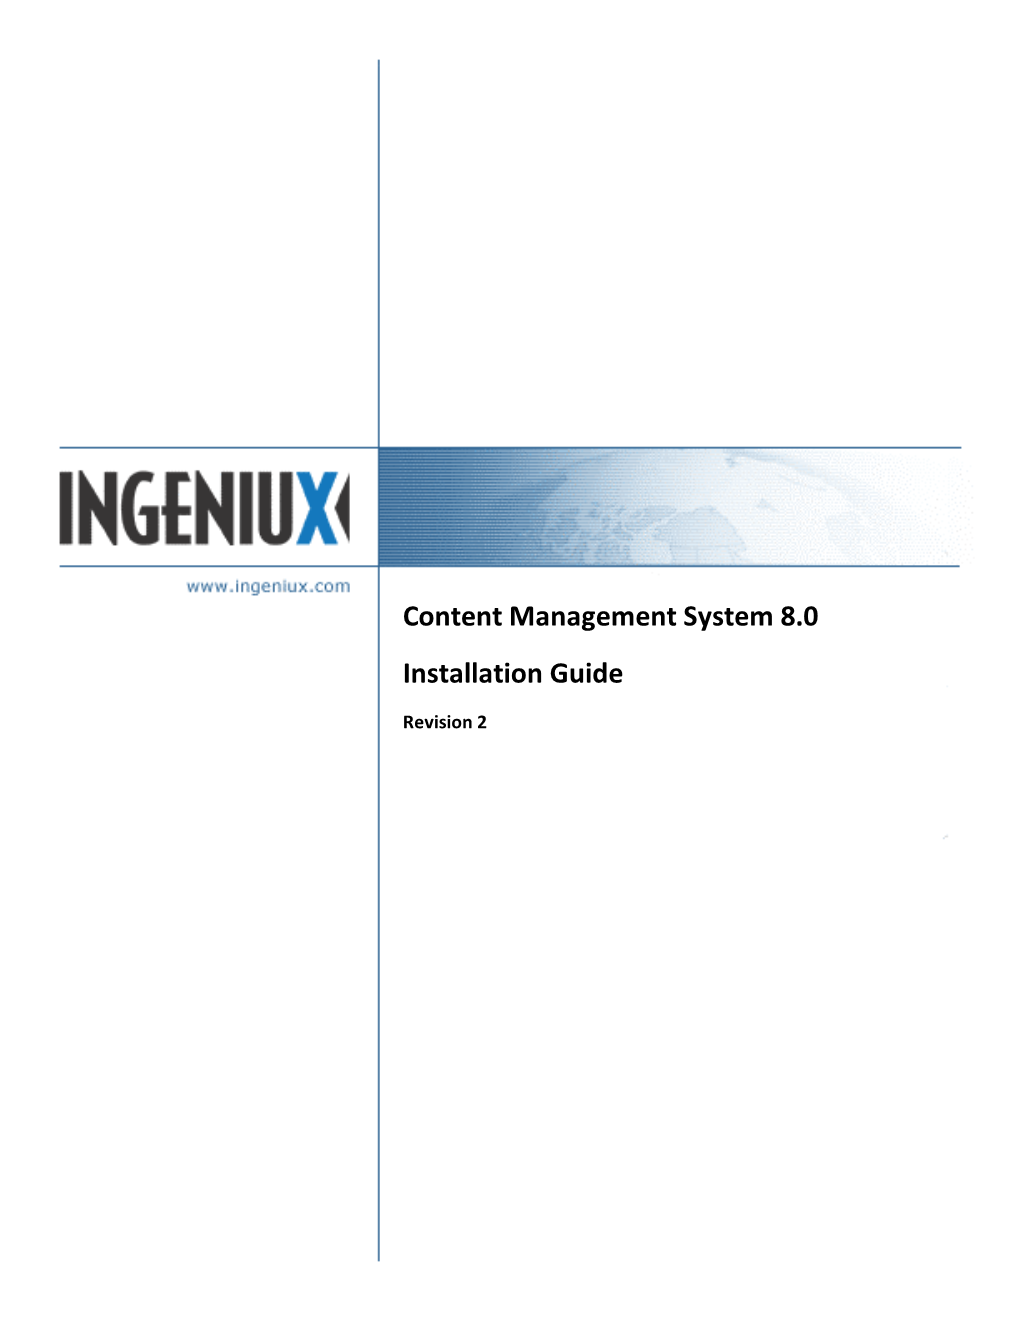 Content Management System 8.0 Installation Guide